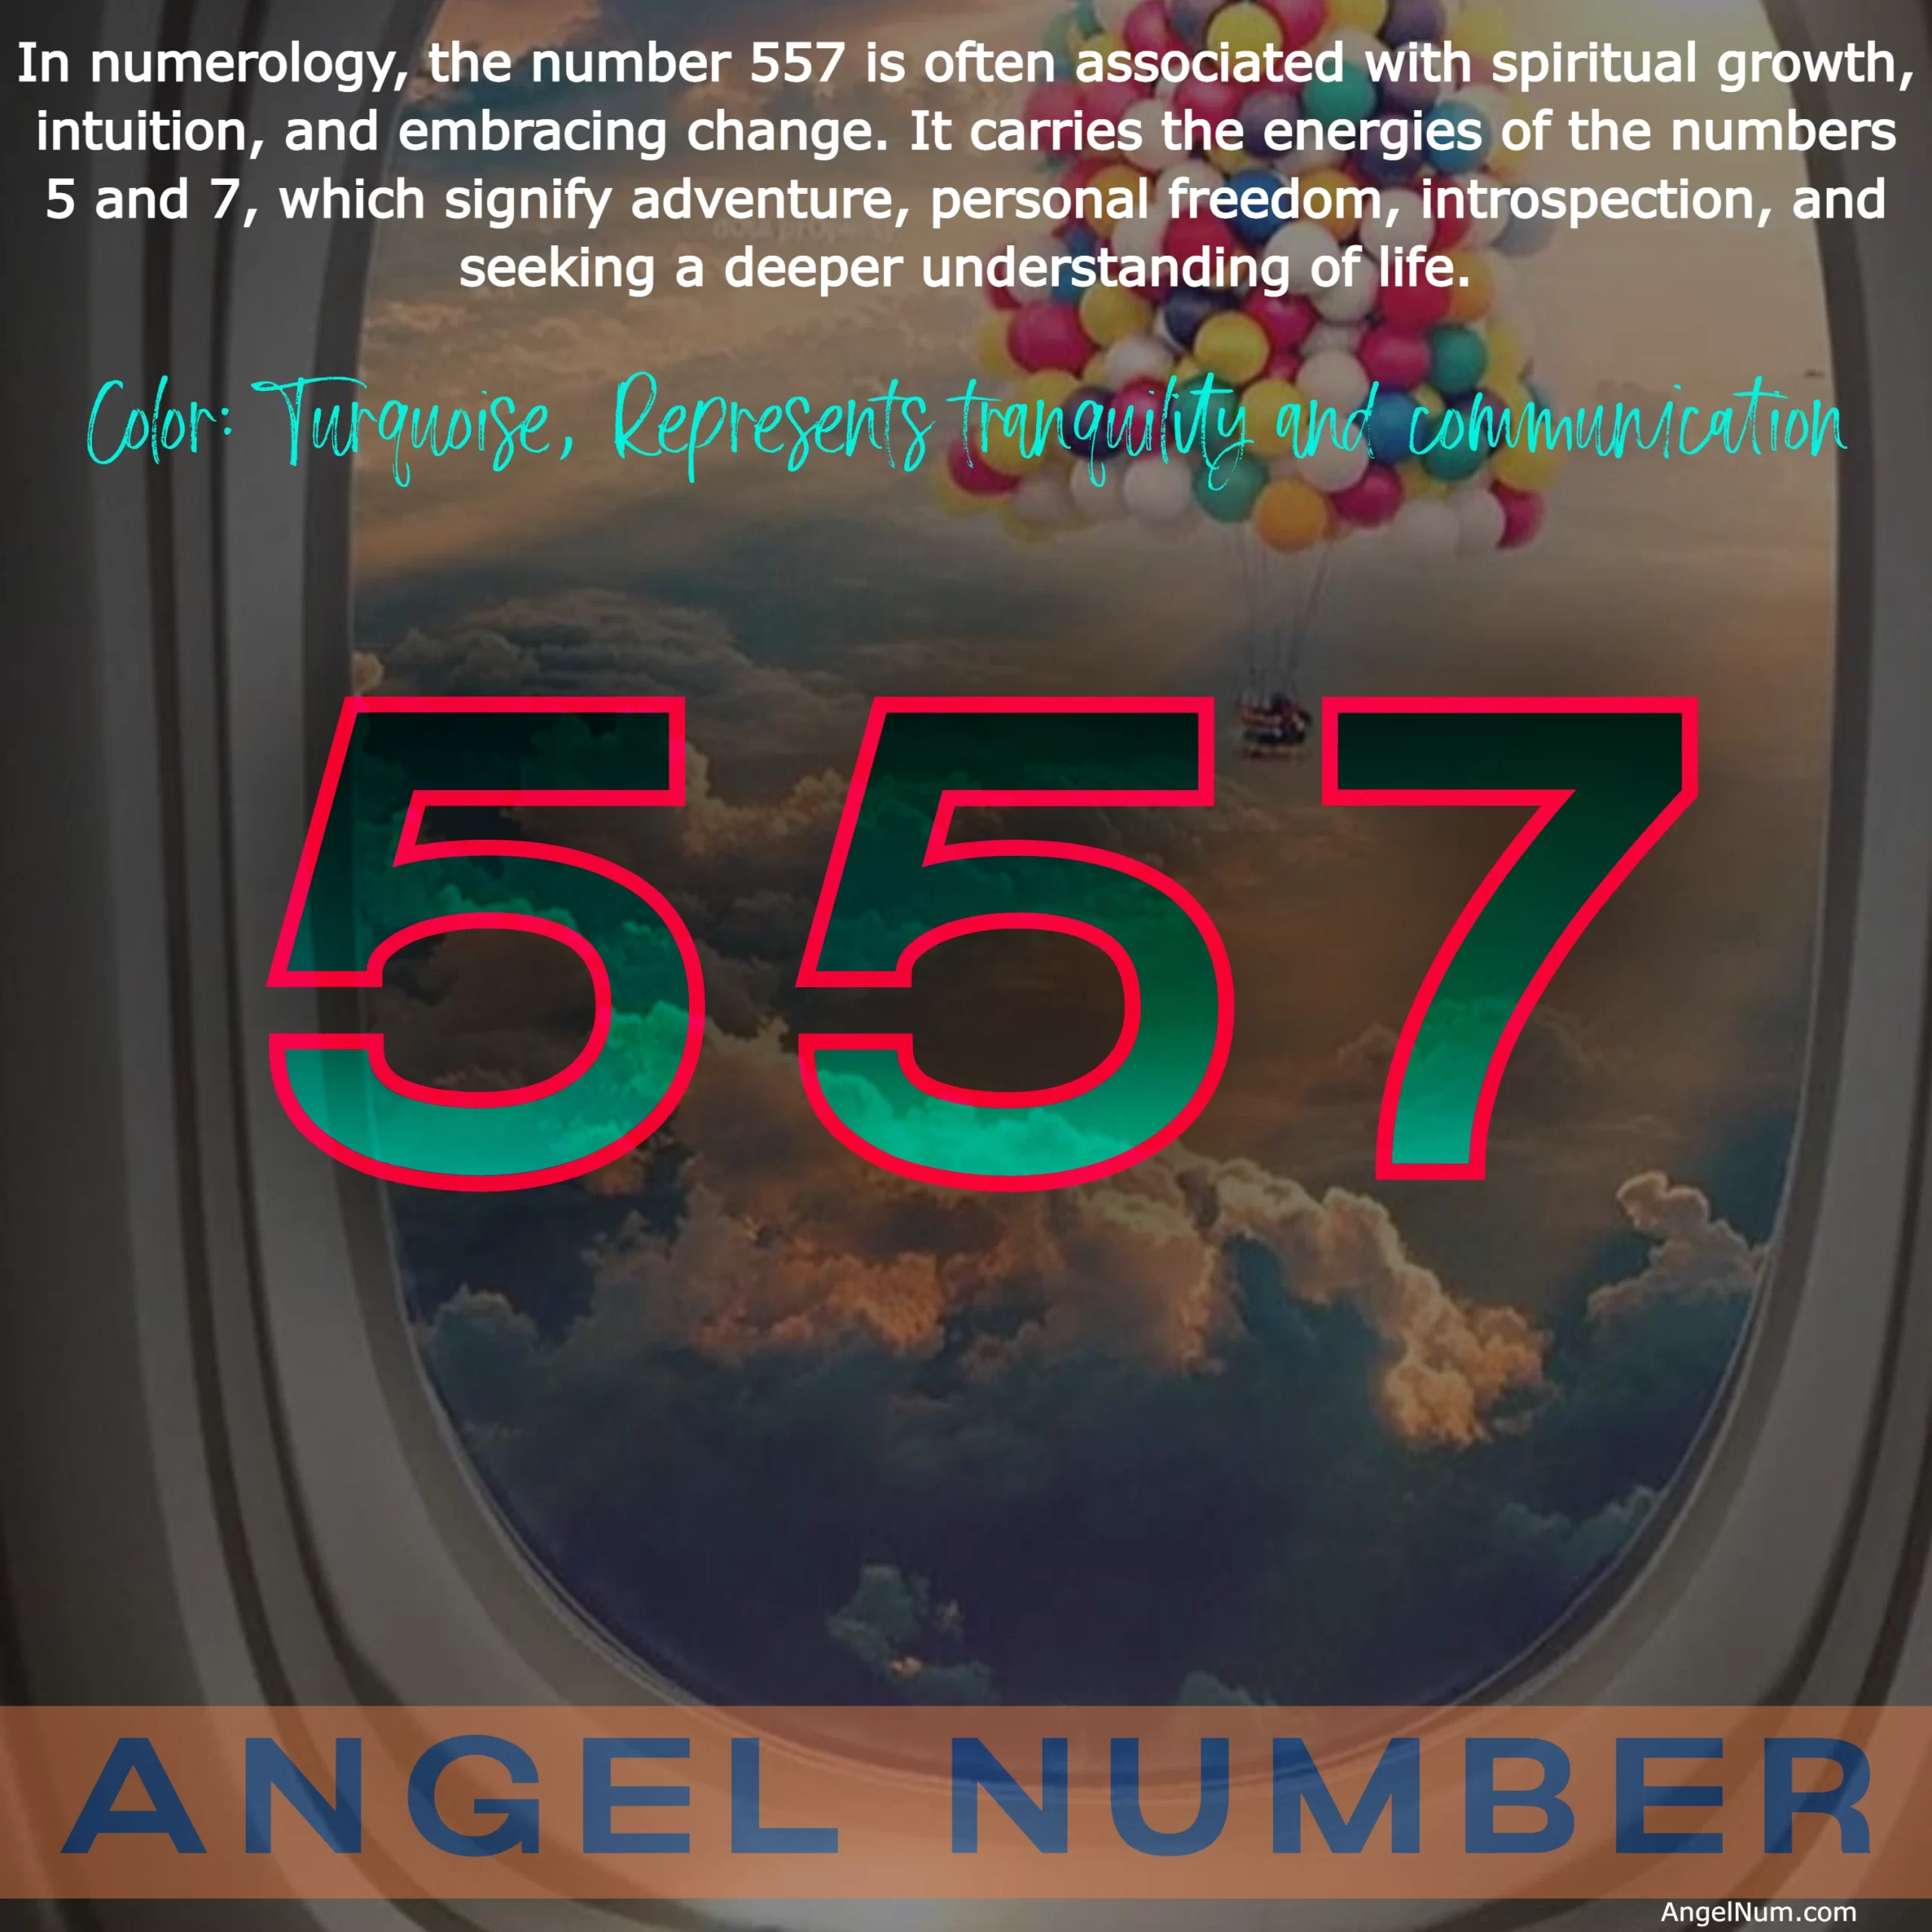 Angel Number 557: Divine Guidance for Spiritual Growth